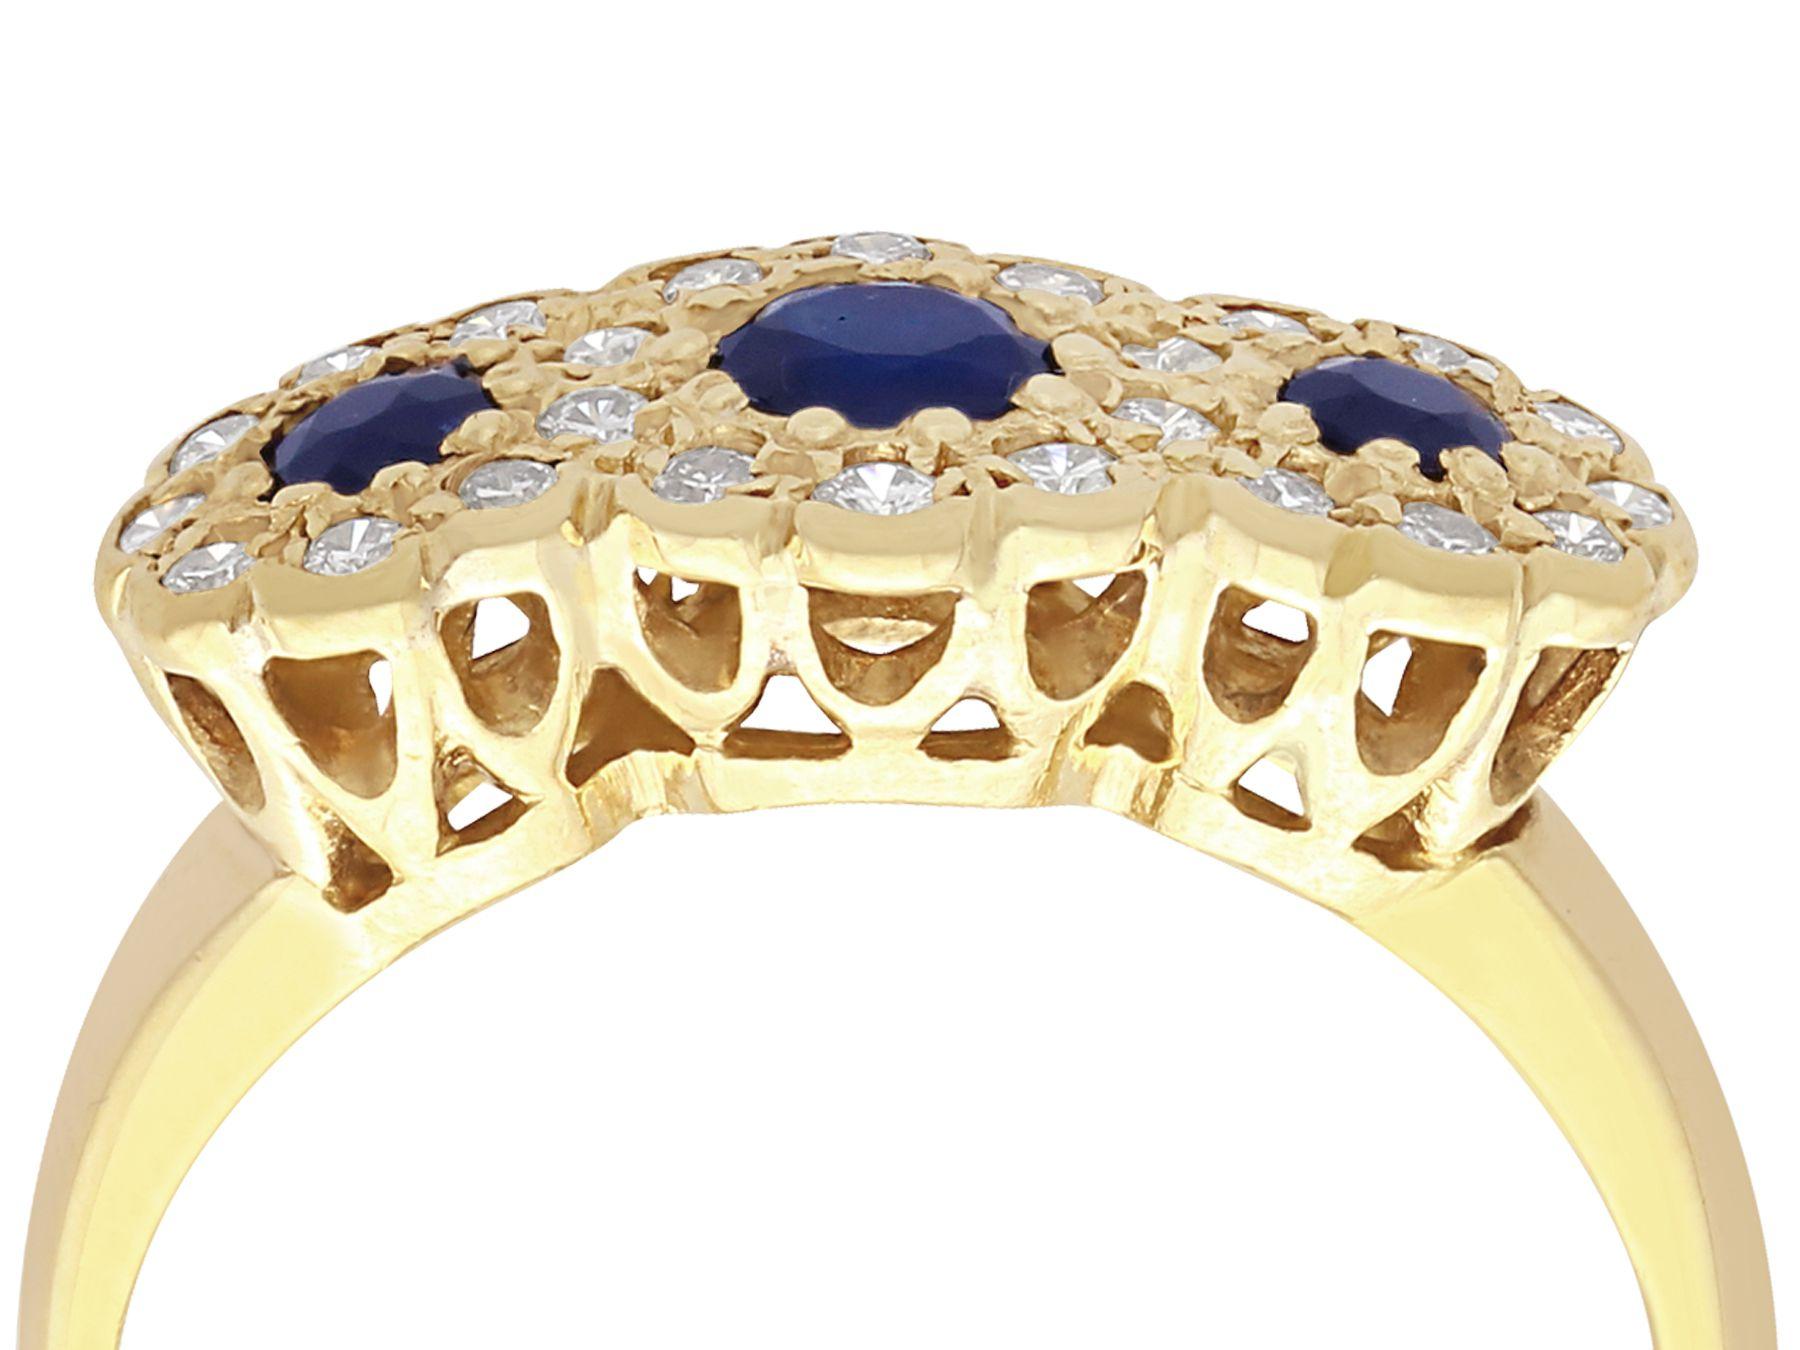 An impressive 0.55 carat natural blue sapphire and 0.46 carat diamond, 18 karat yellow gold dress ring; part of our jewelry and estate jewelry collections

This impressive sapphire and diamond band ring has been crafted in 18k yellow gold.

The